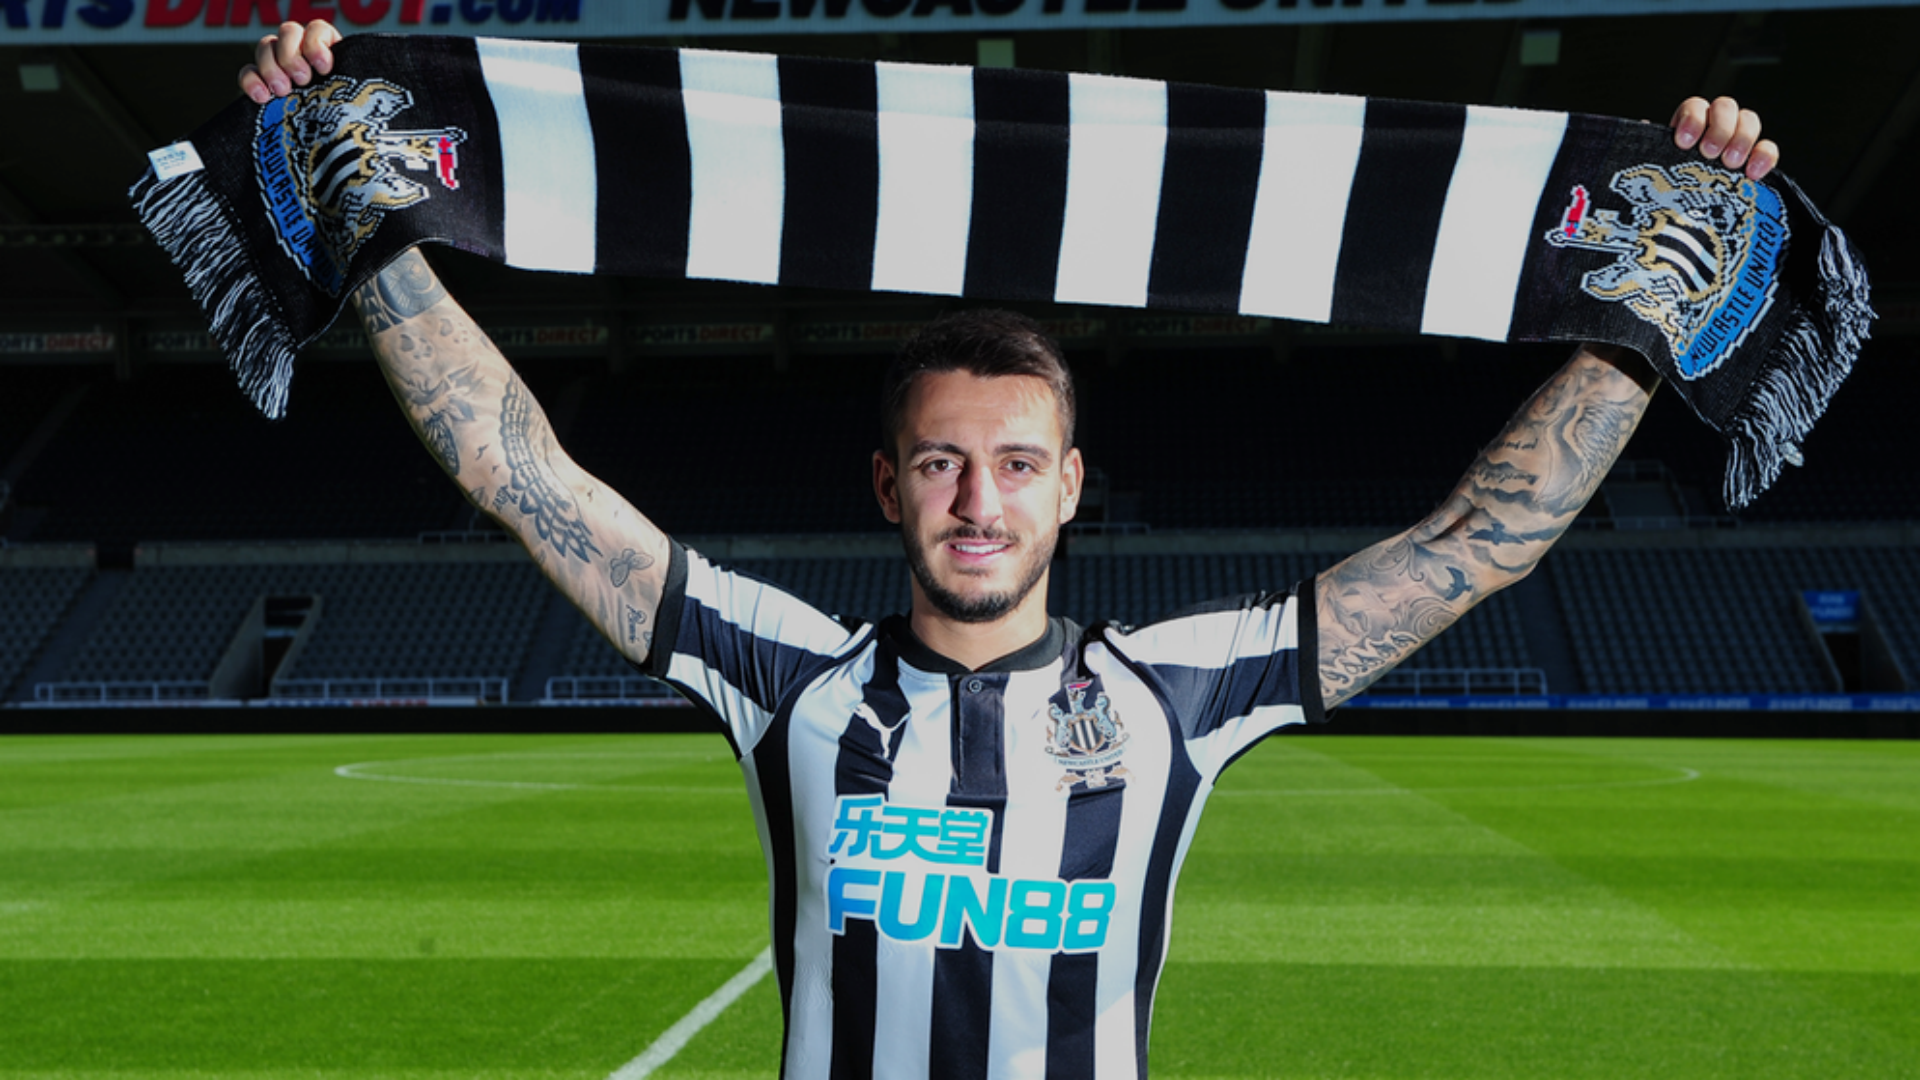 Joselu's Remarkable Journey and Prospective High-Profile Moves